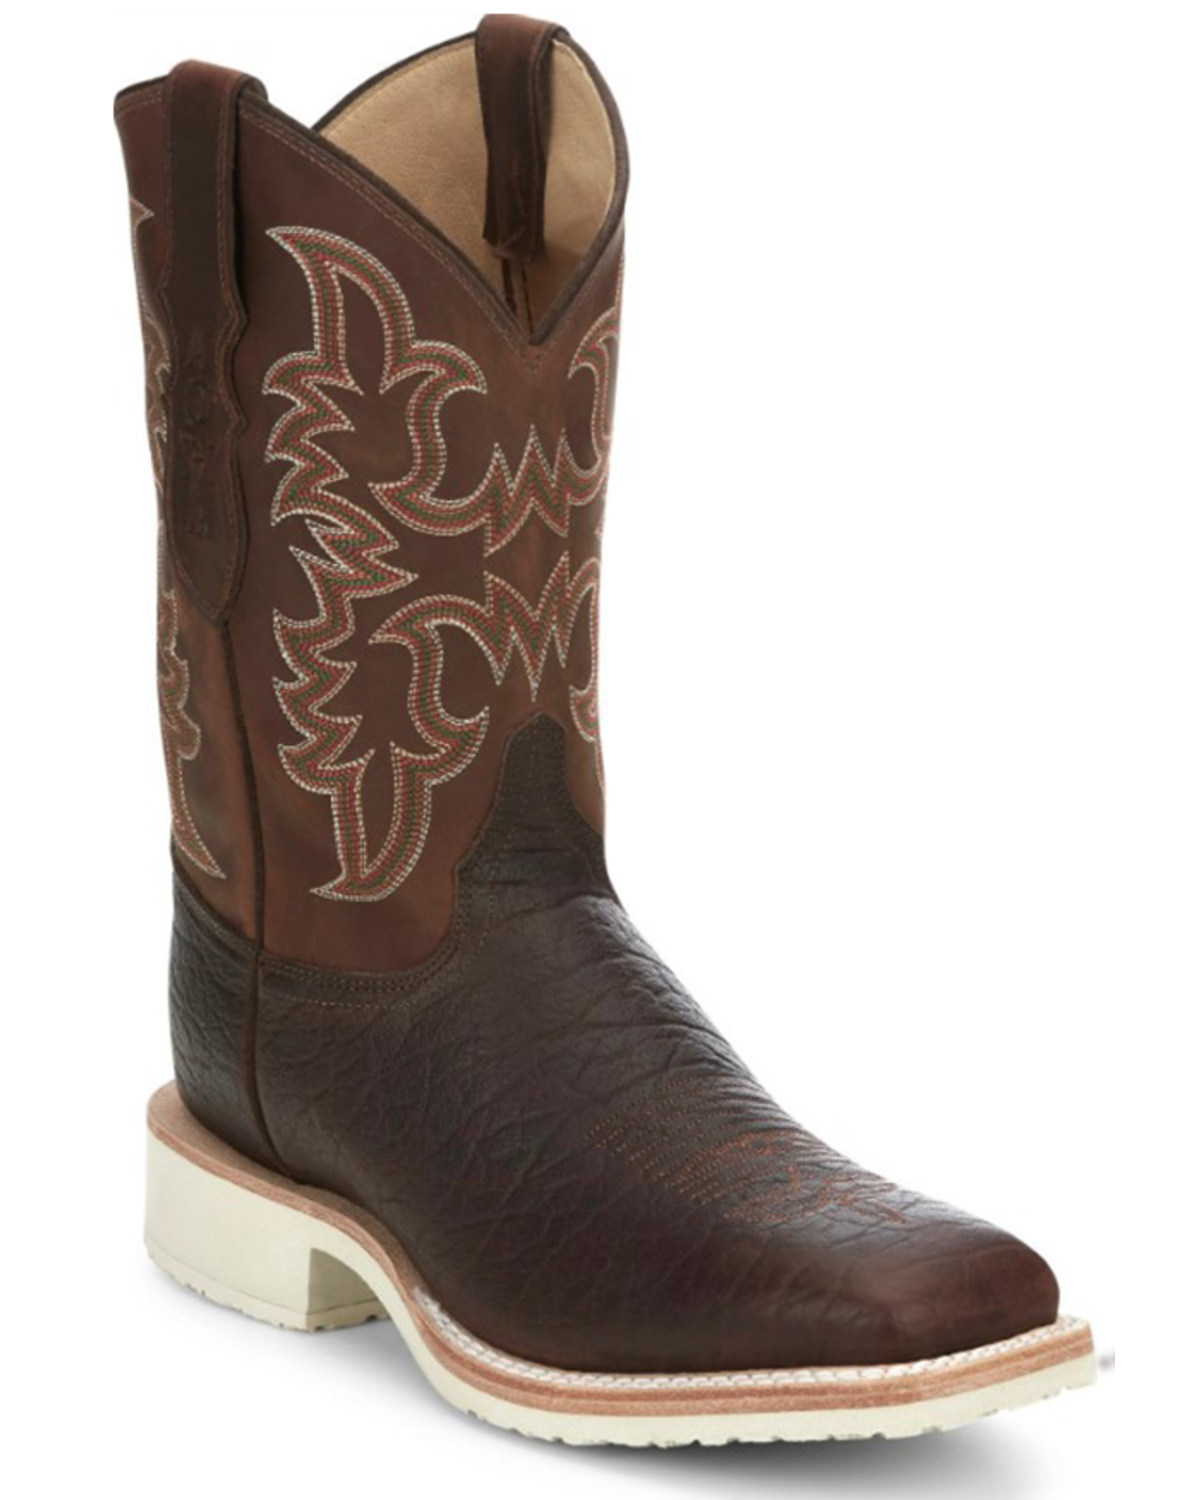 Justin Men's Western Boots - Broad Square Toe